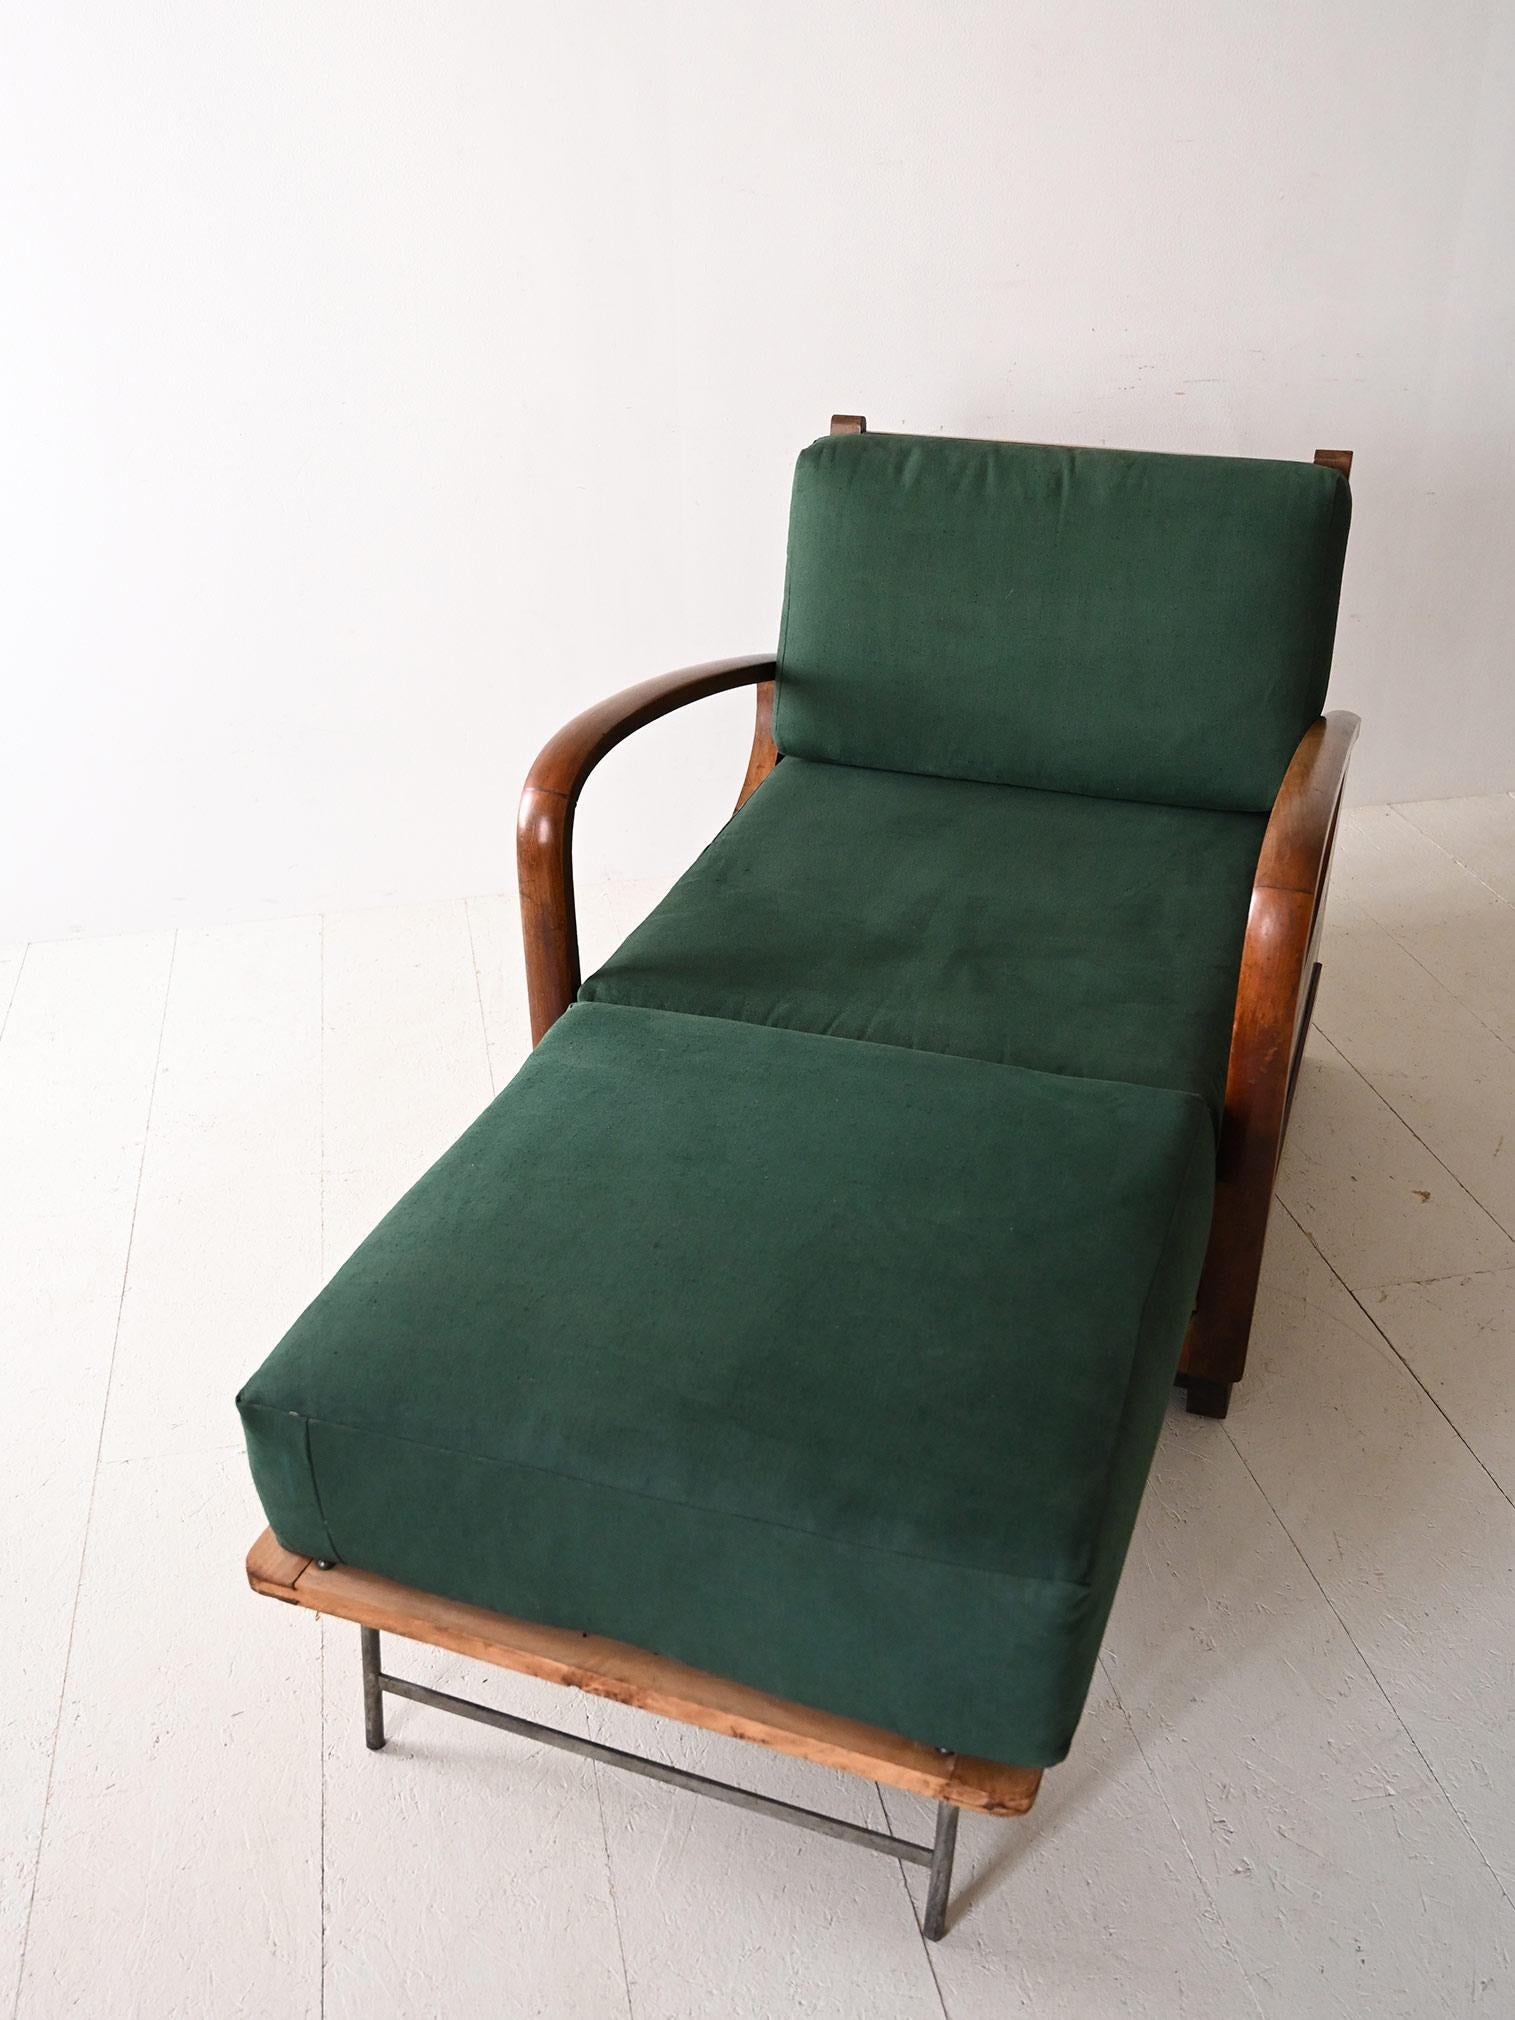 Deco armchair convertible into bed For Sale 3